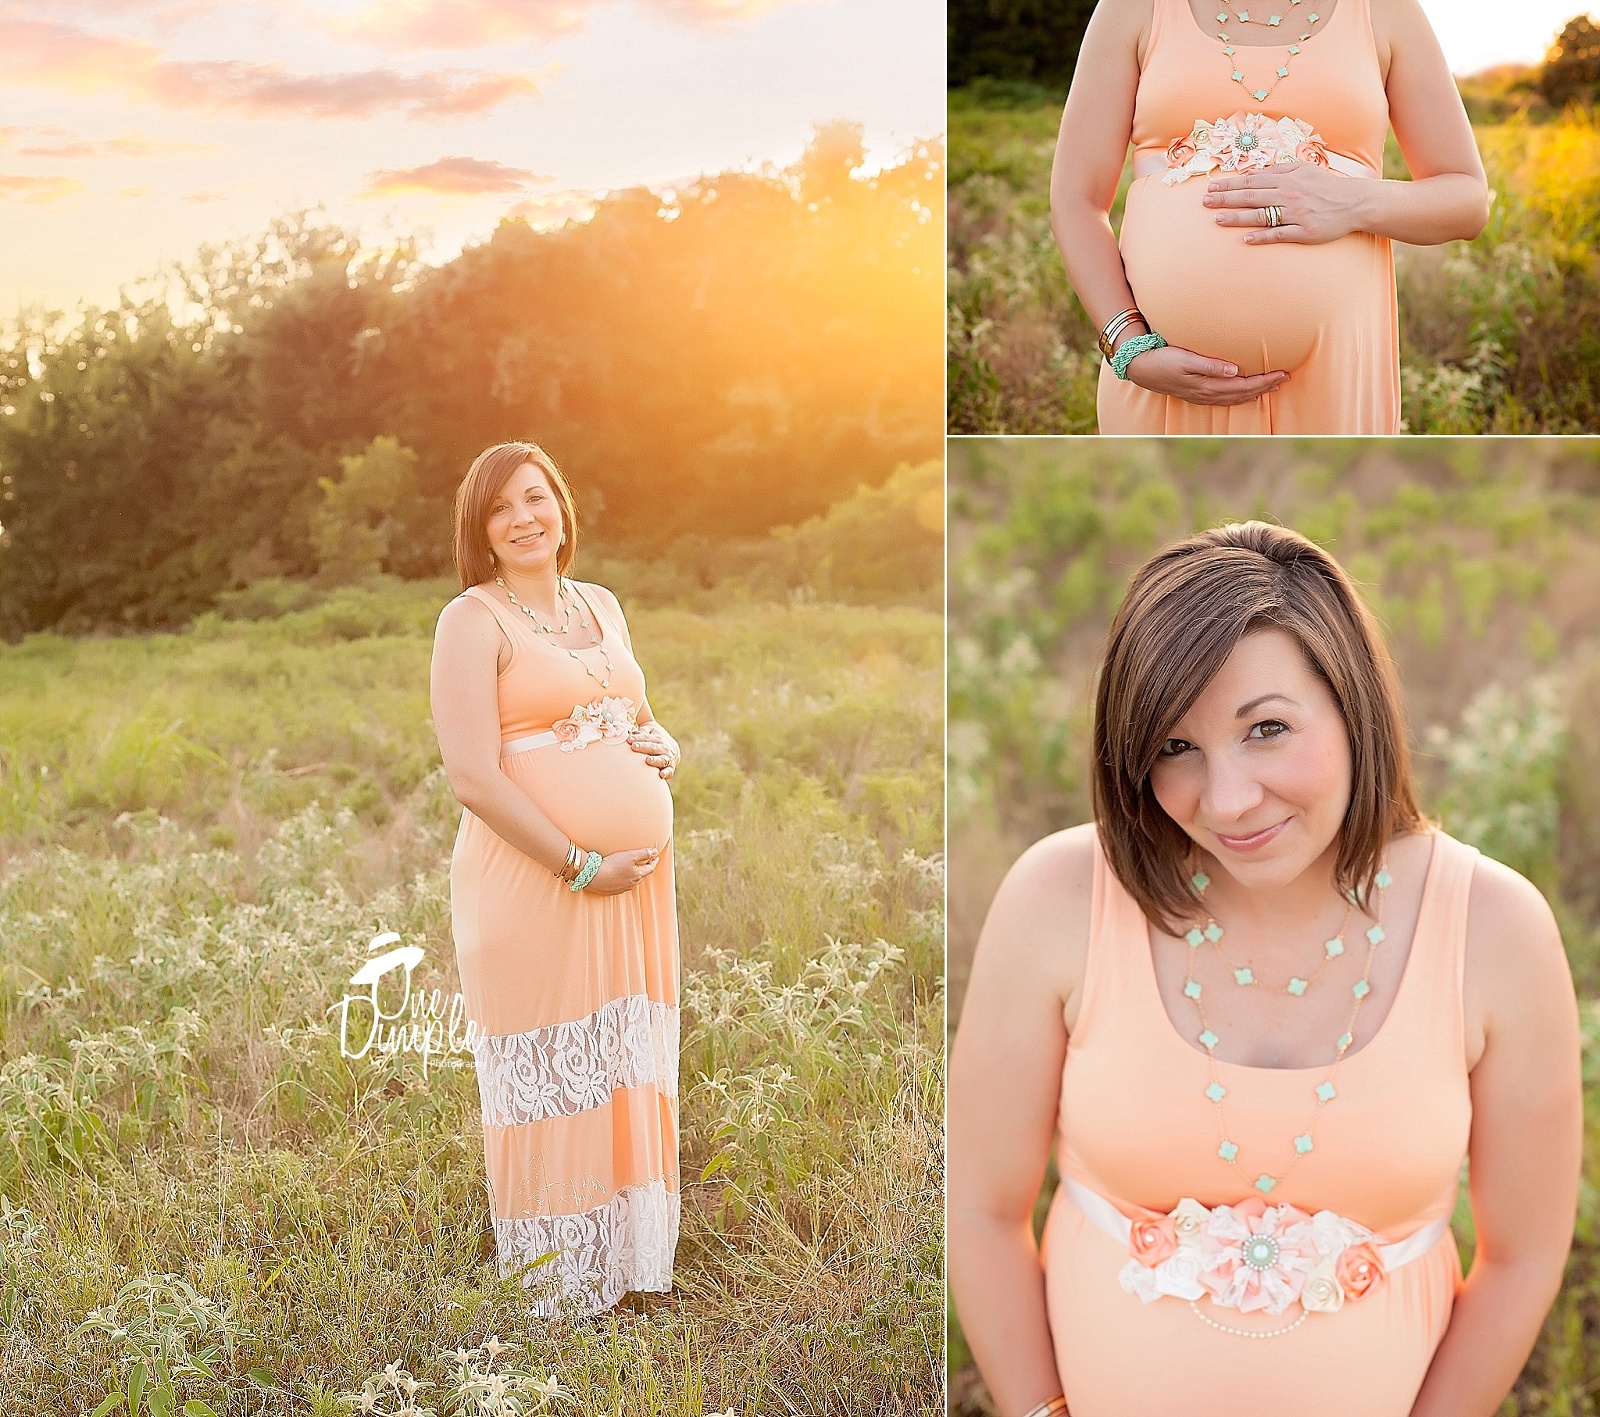 mom dressed in orange out for maternity shot